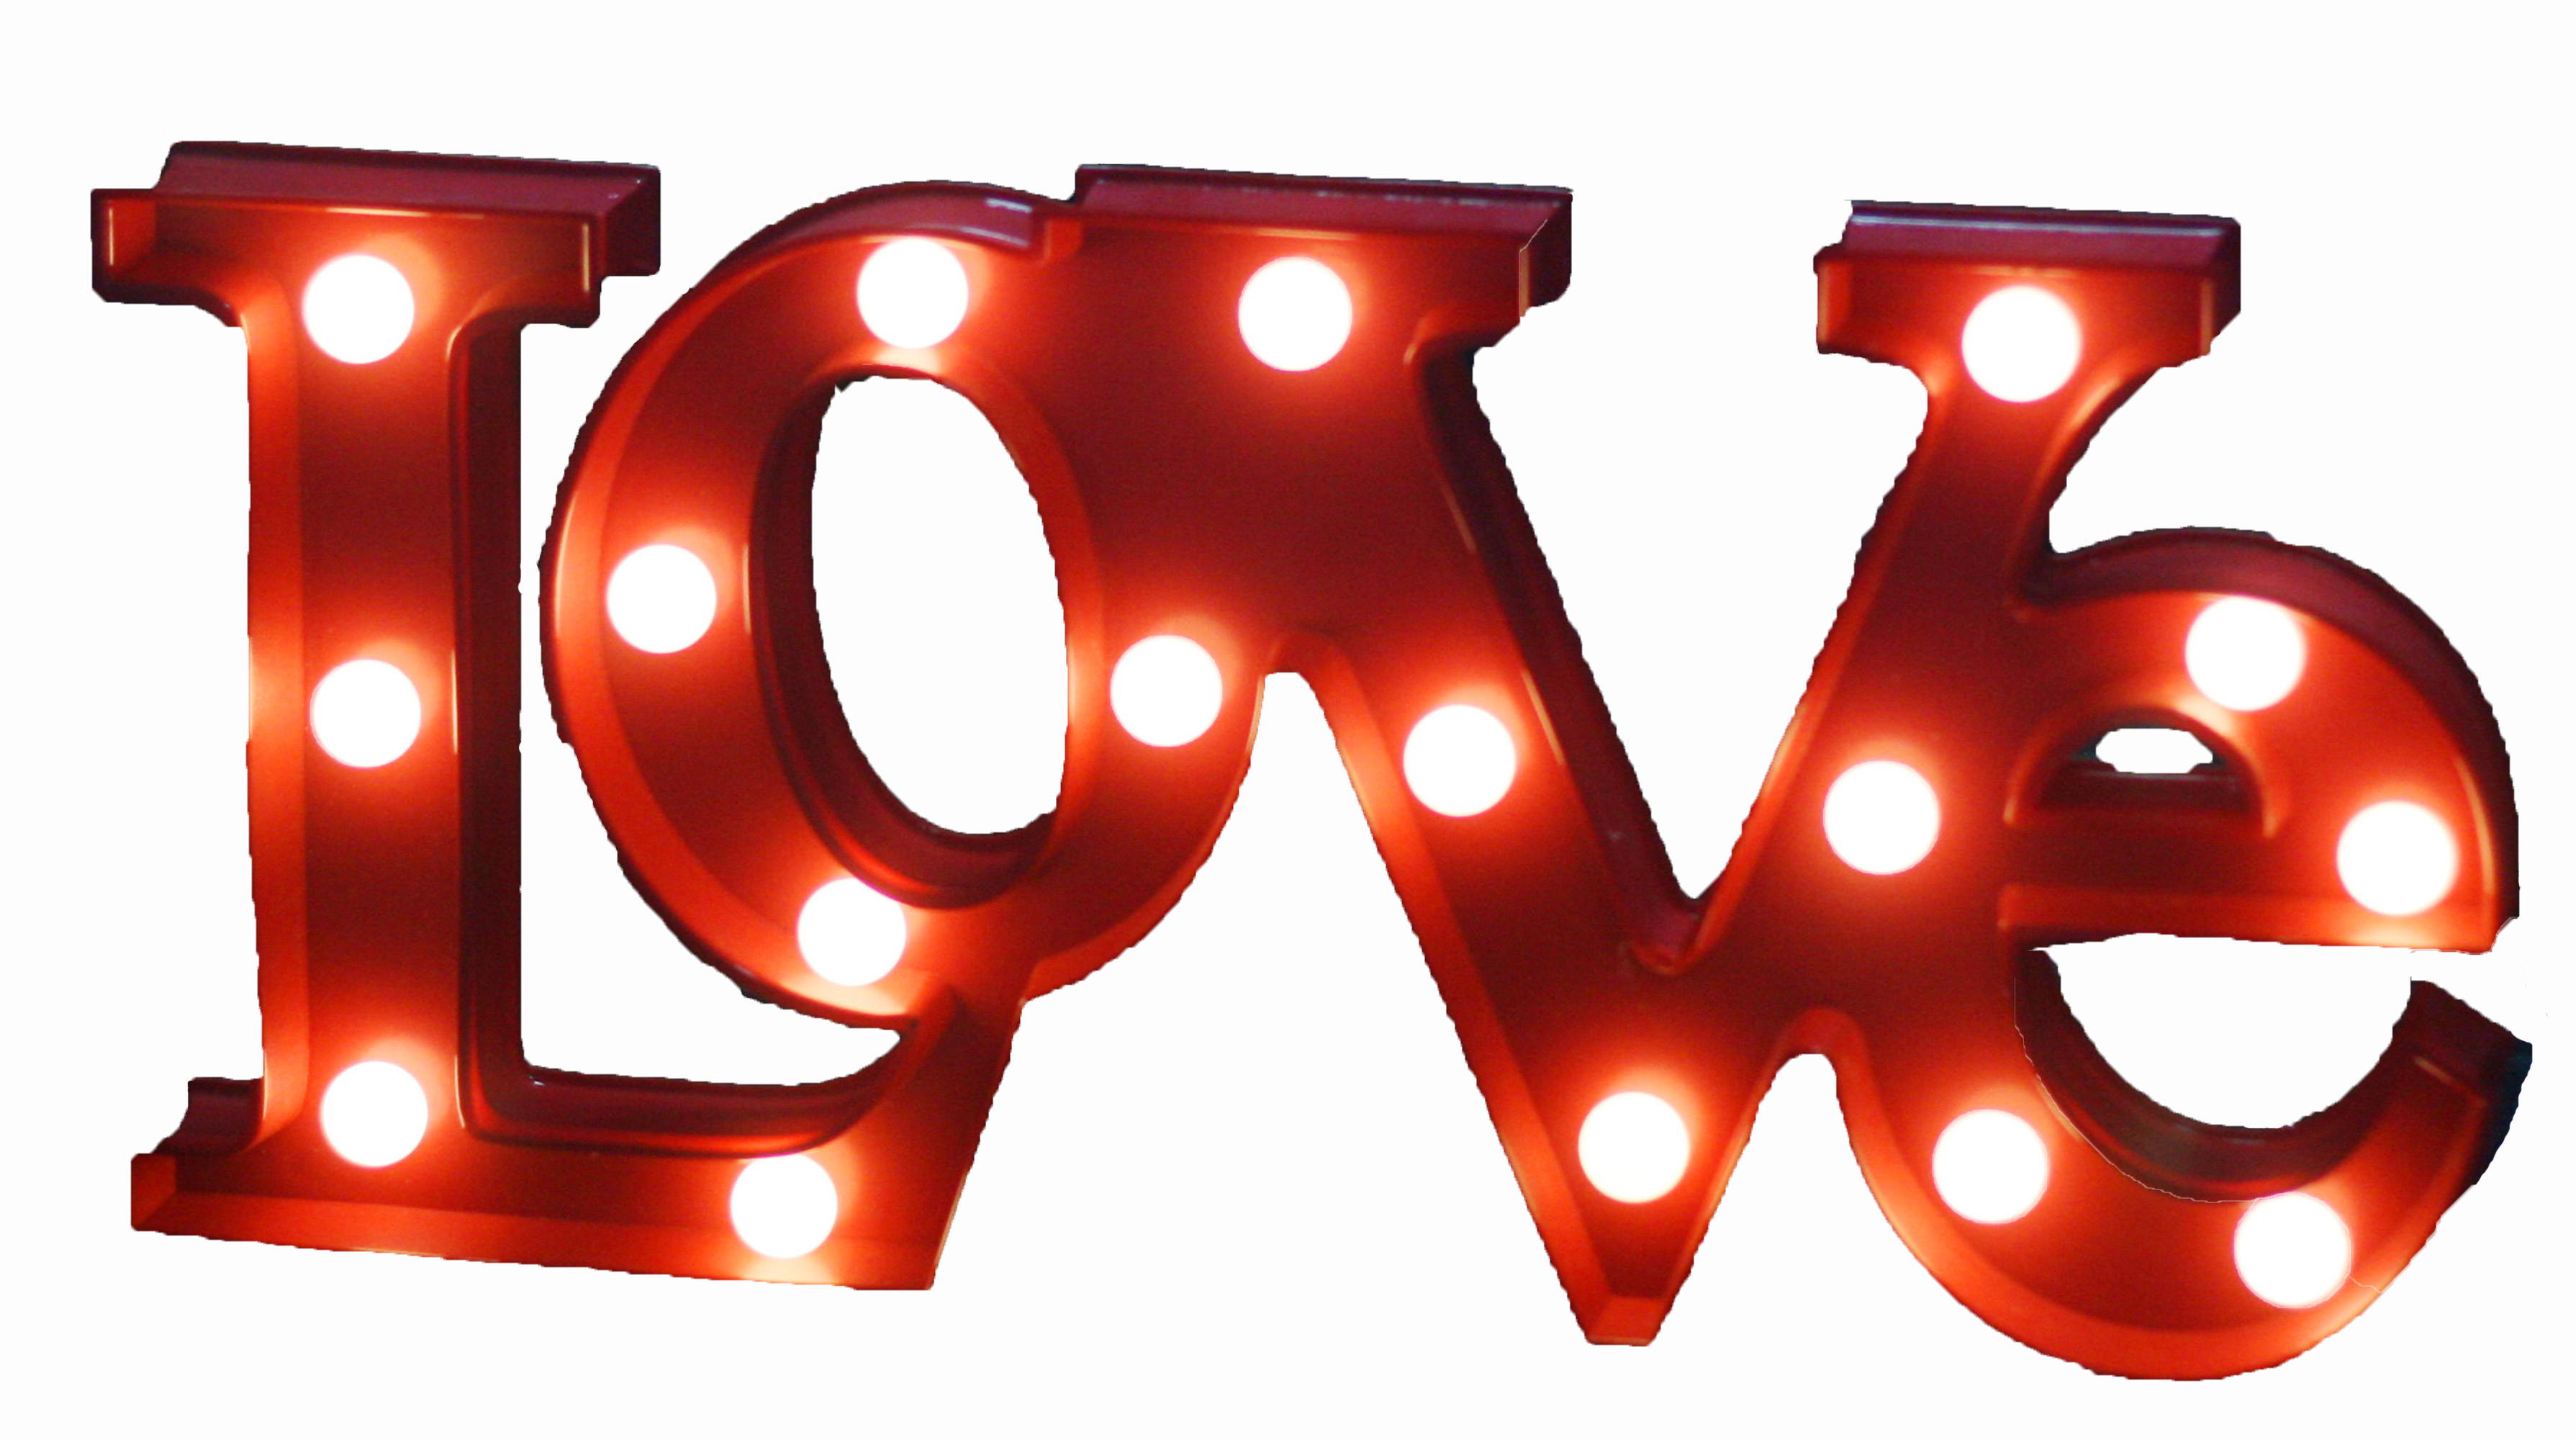 Creative Motion Industries Battery-Operated 17 Light Warmwhite Ball LED PLASTIC "LOVE" Light